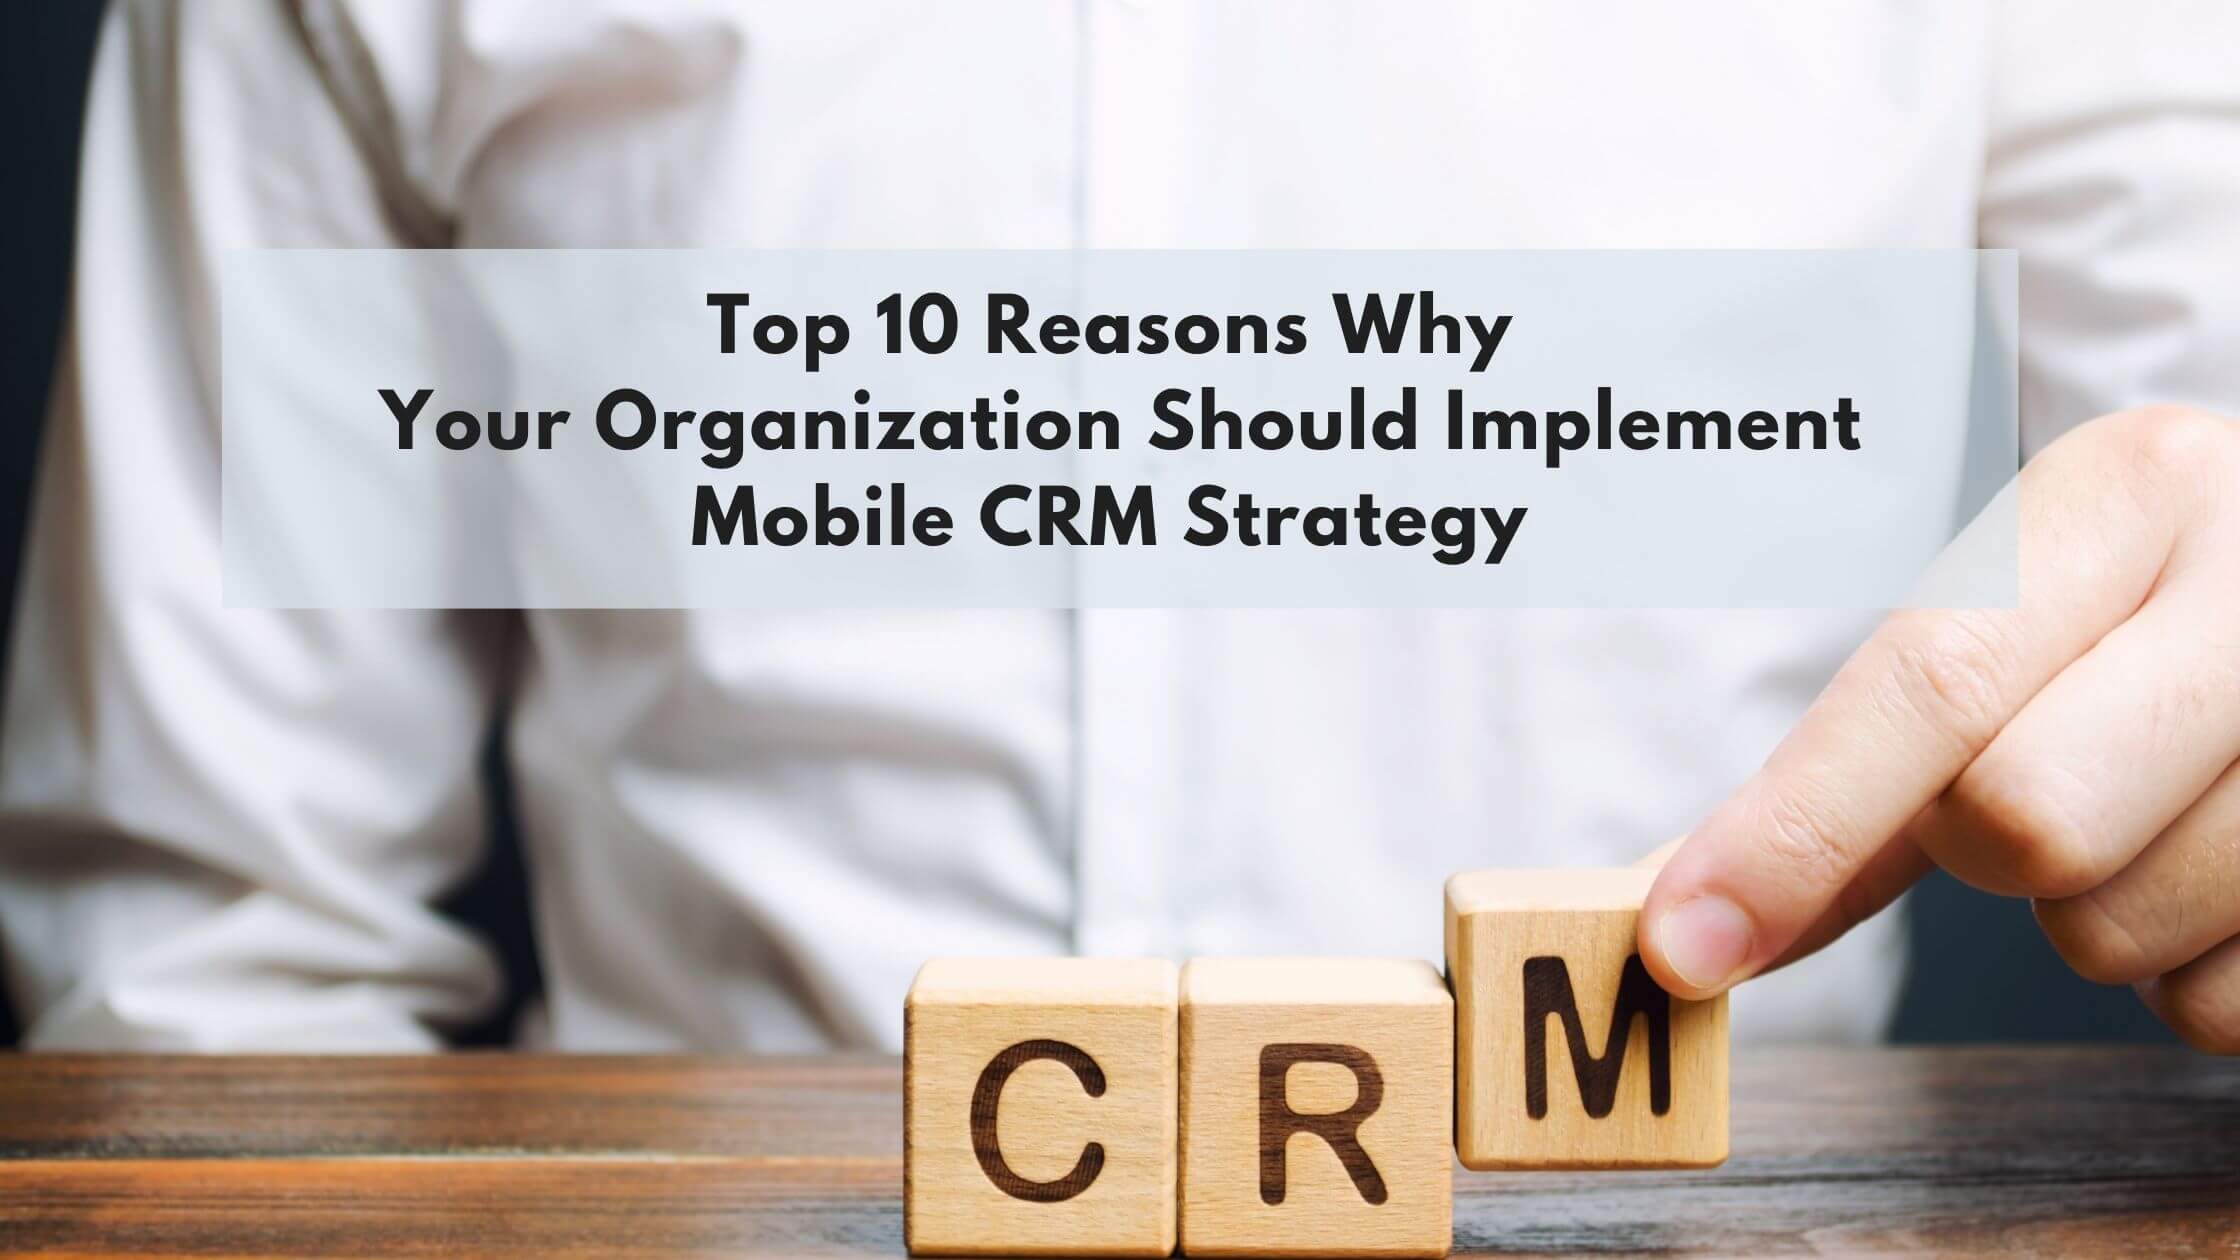 Top 10 Reasons Why Your Organization Should Implement Mobile CRM Strategy